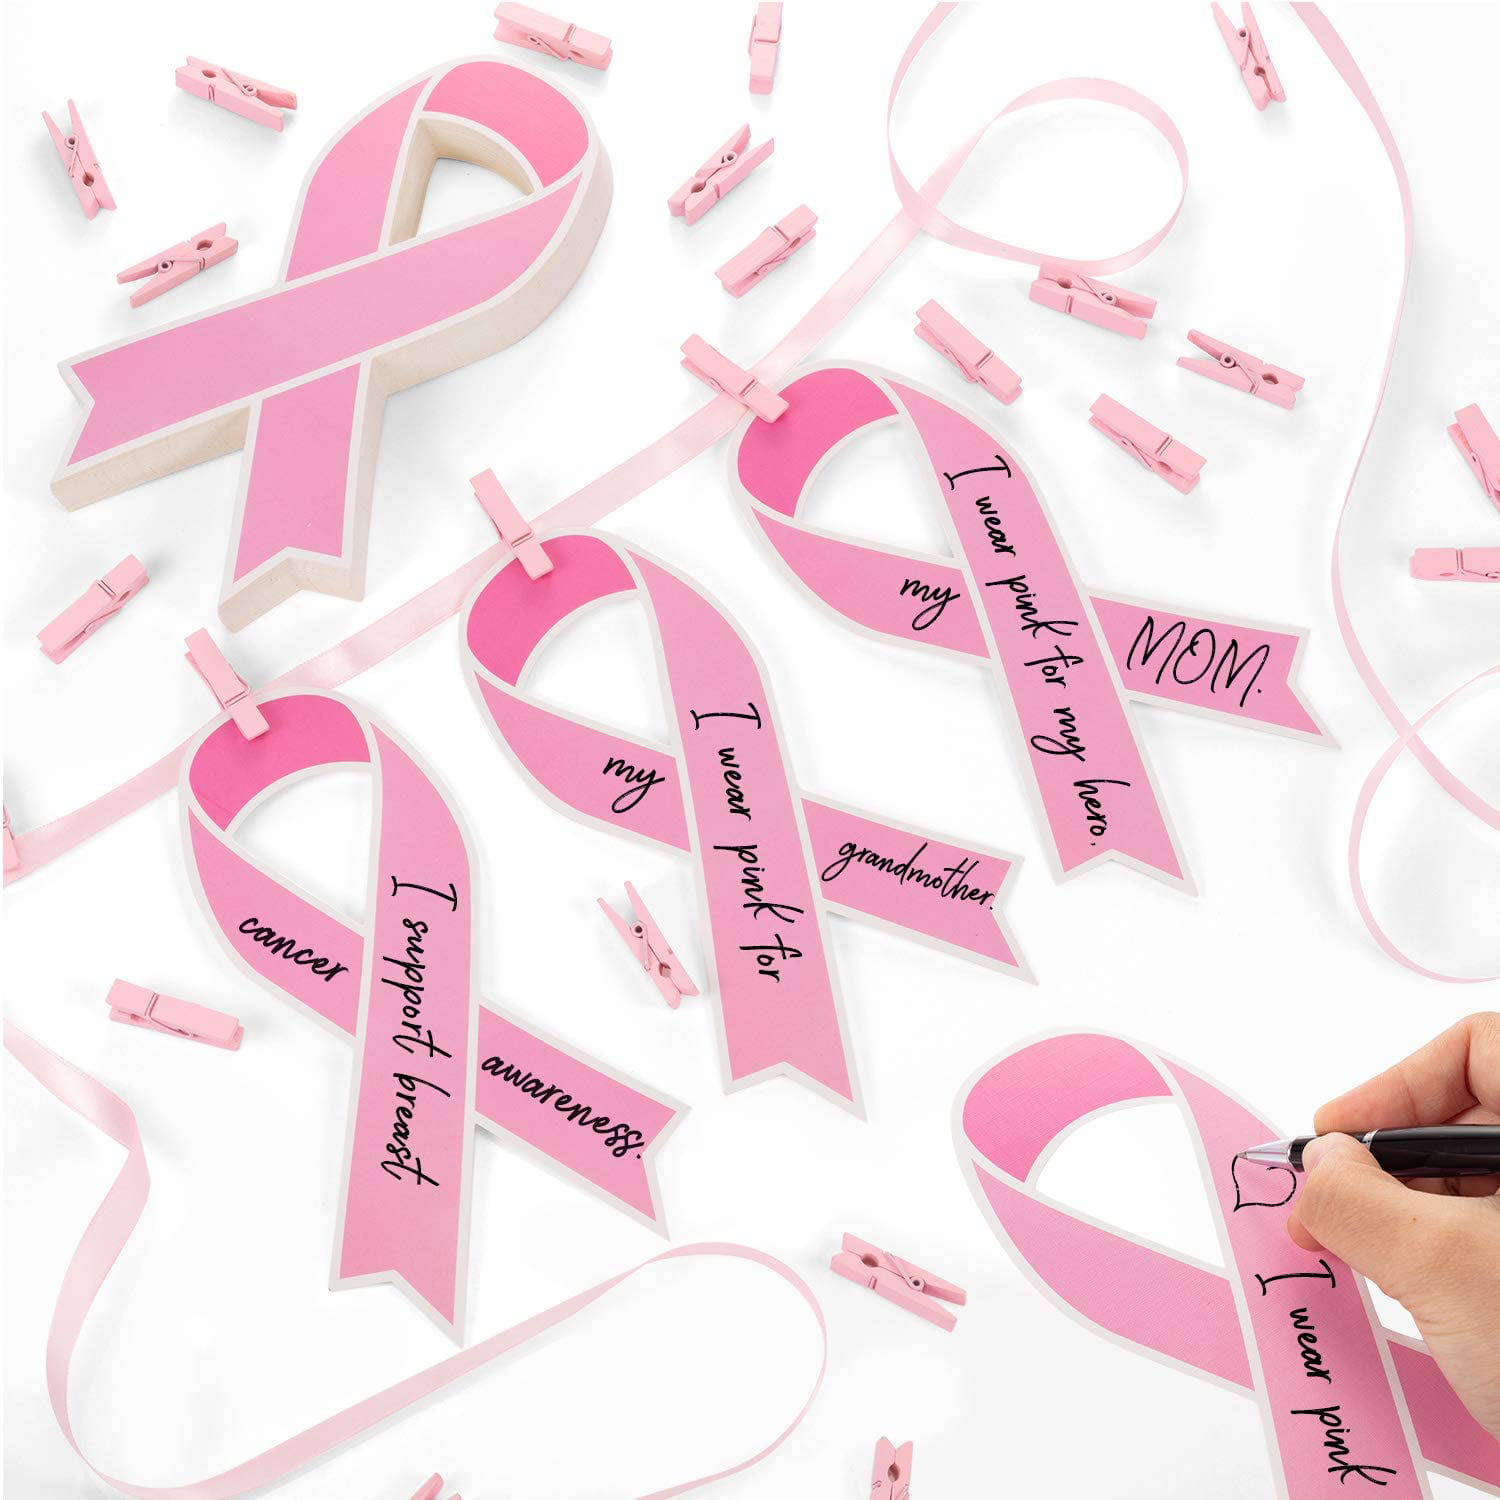 Breast Cancer Awareness Pink Paper Ribbon,50 Pieces Cutouts Support Cards,50 Pieces Pink Wooden Clips 